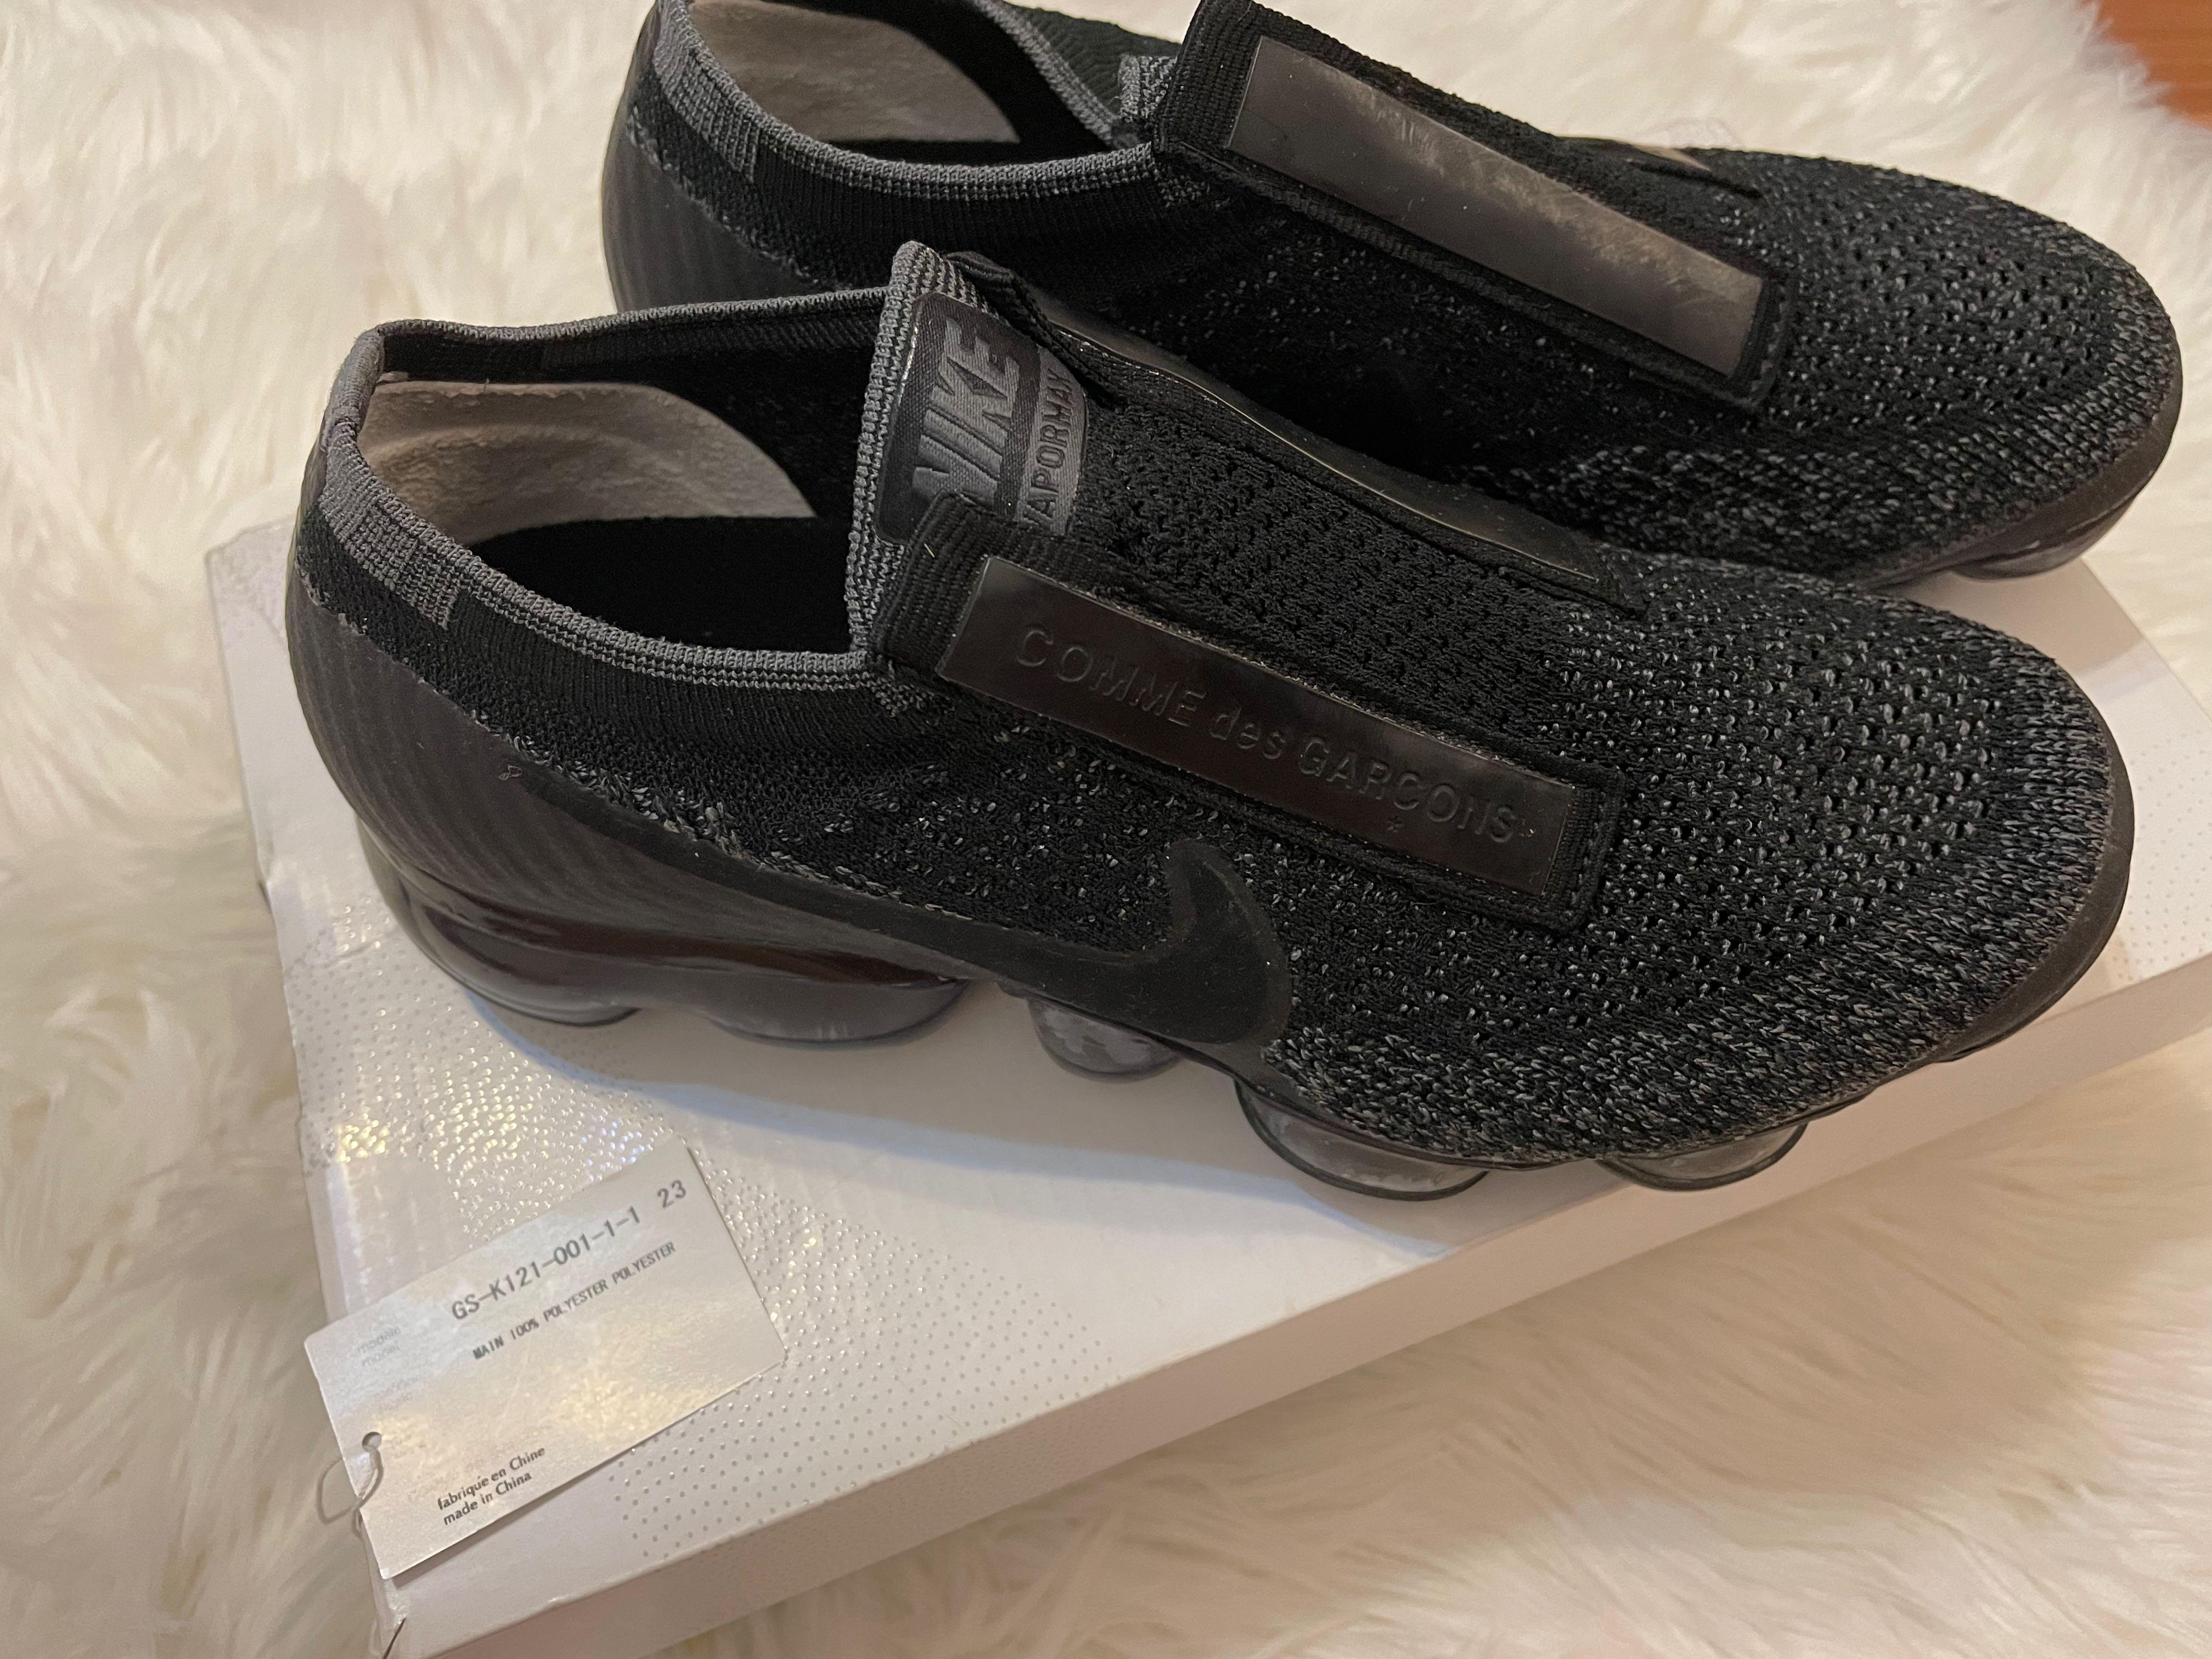 LIMITED EDITION- Comme des Garcons CDG x Nike Air Vapormax